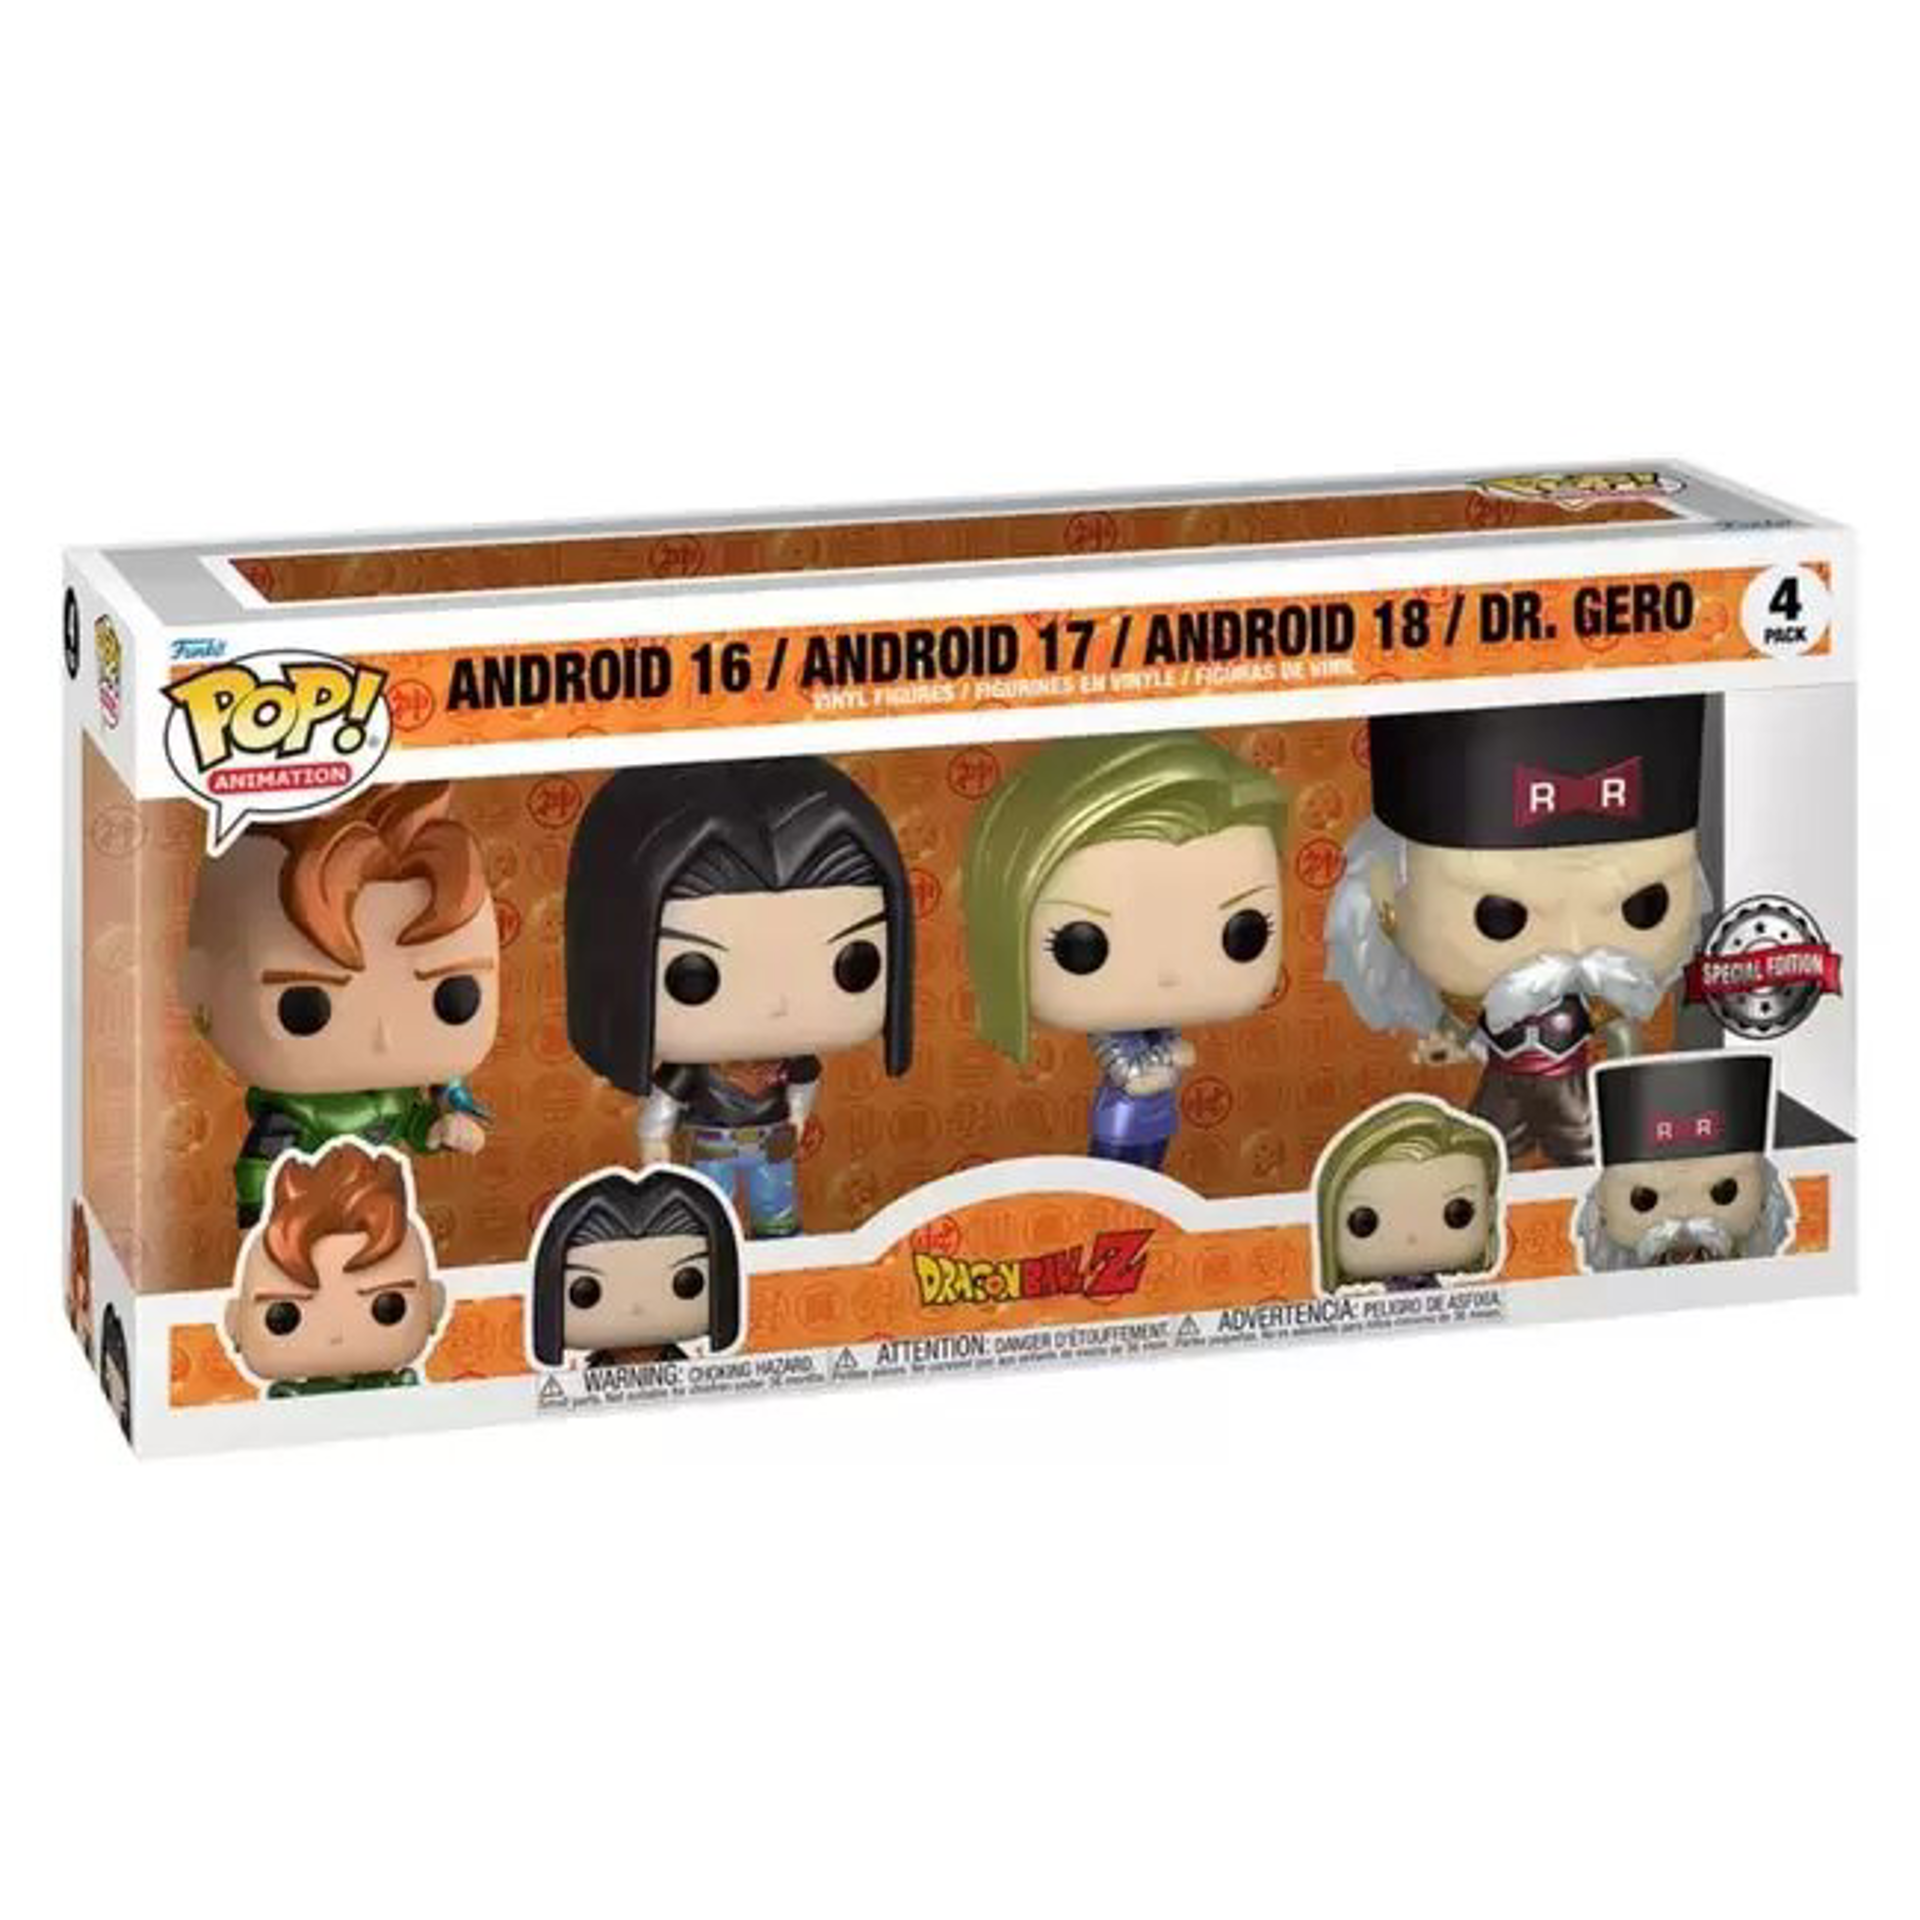 Funko Pop! 4-Pack: Animation: Dragon Ball Z - Android 16 / Android  17 / Android 18 / Dr. Gero (Special Edition)